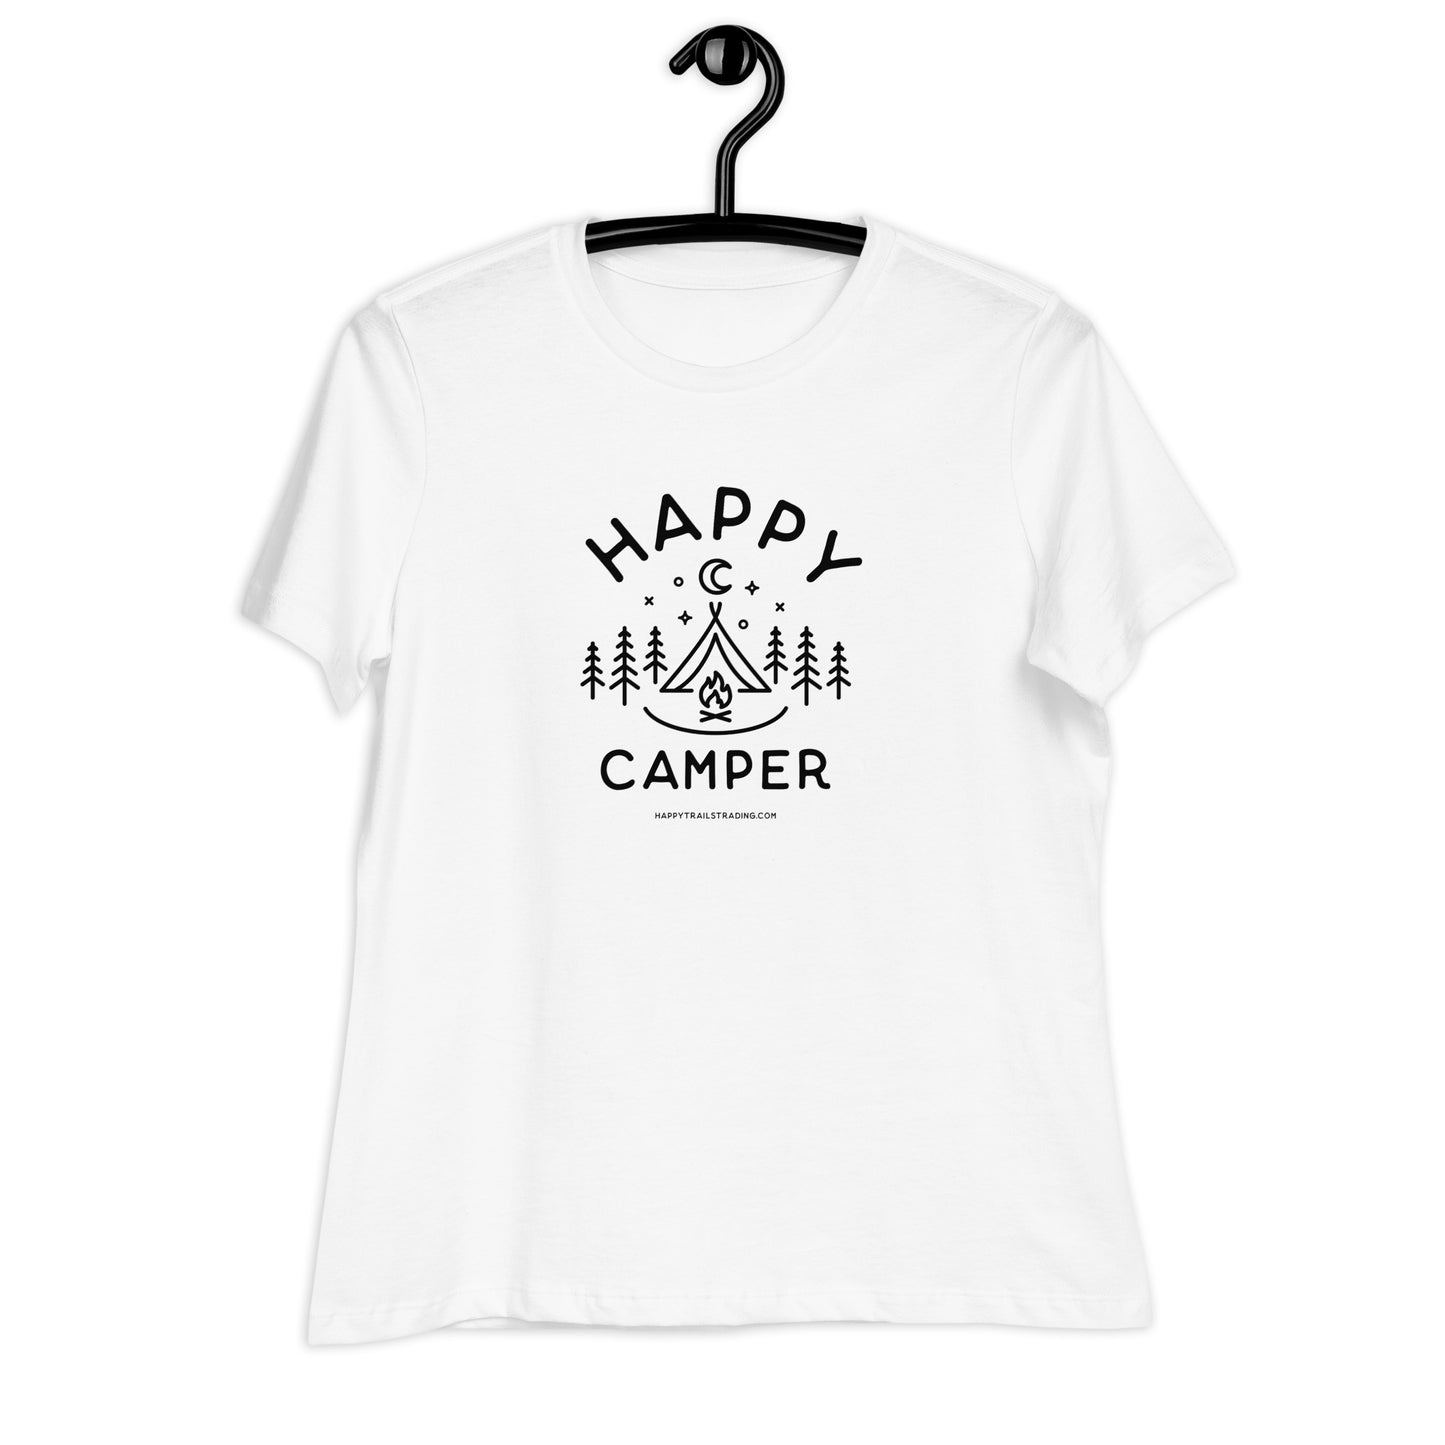 Happy Camper - Women's Relaxed T-Shirt